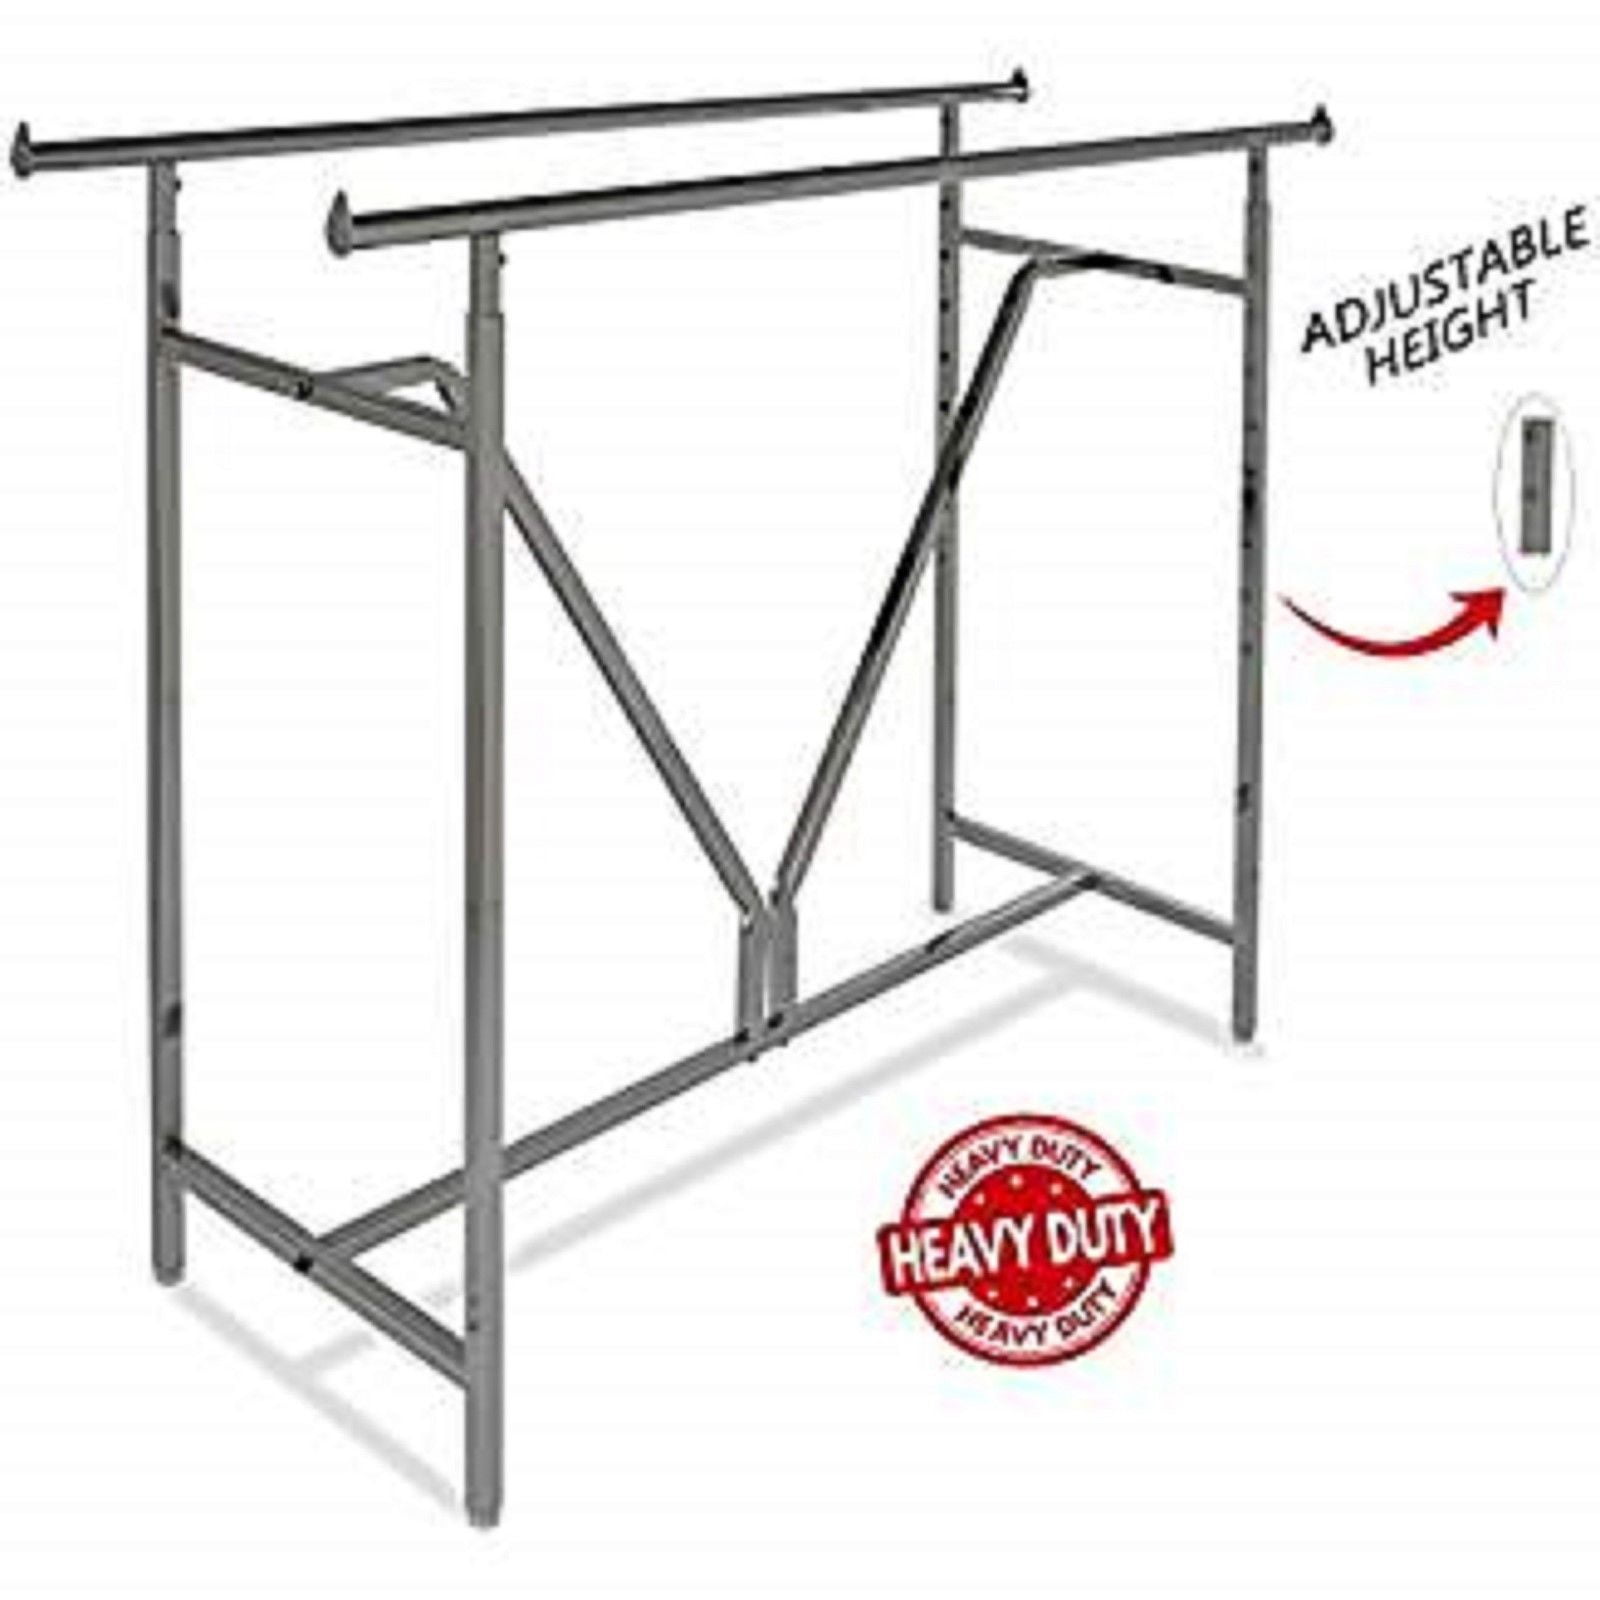 Econoco Adjustable Heavy Duty Double Bar Retail Clothing Rack Rectangular for sale online 